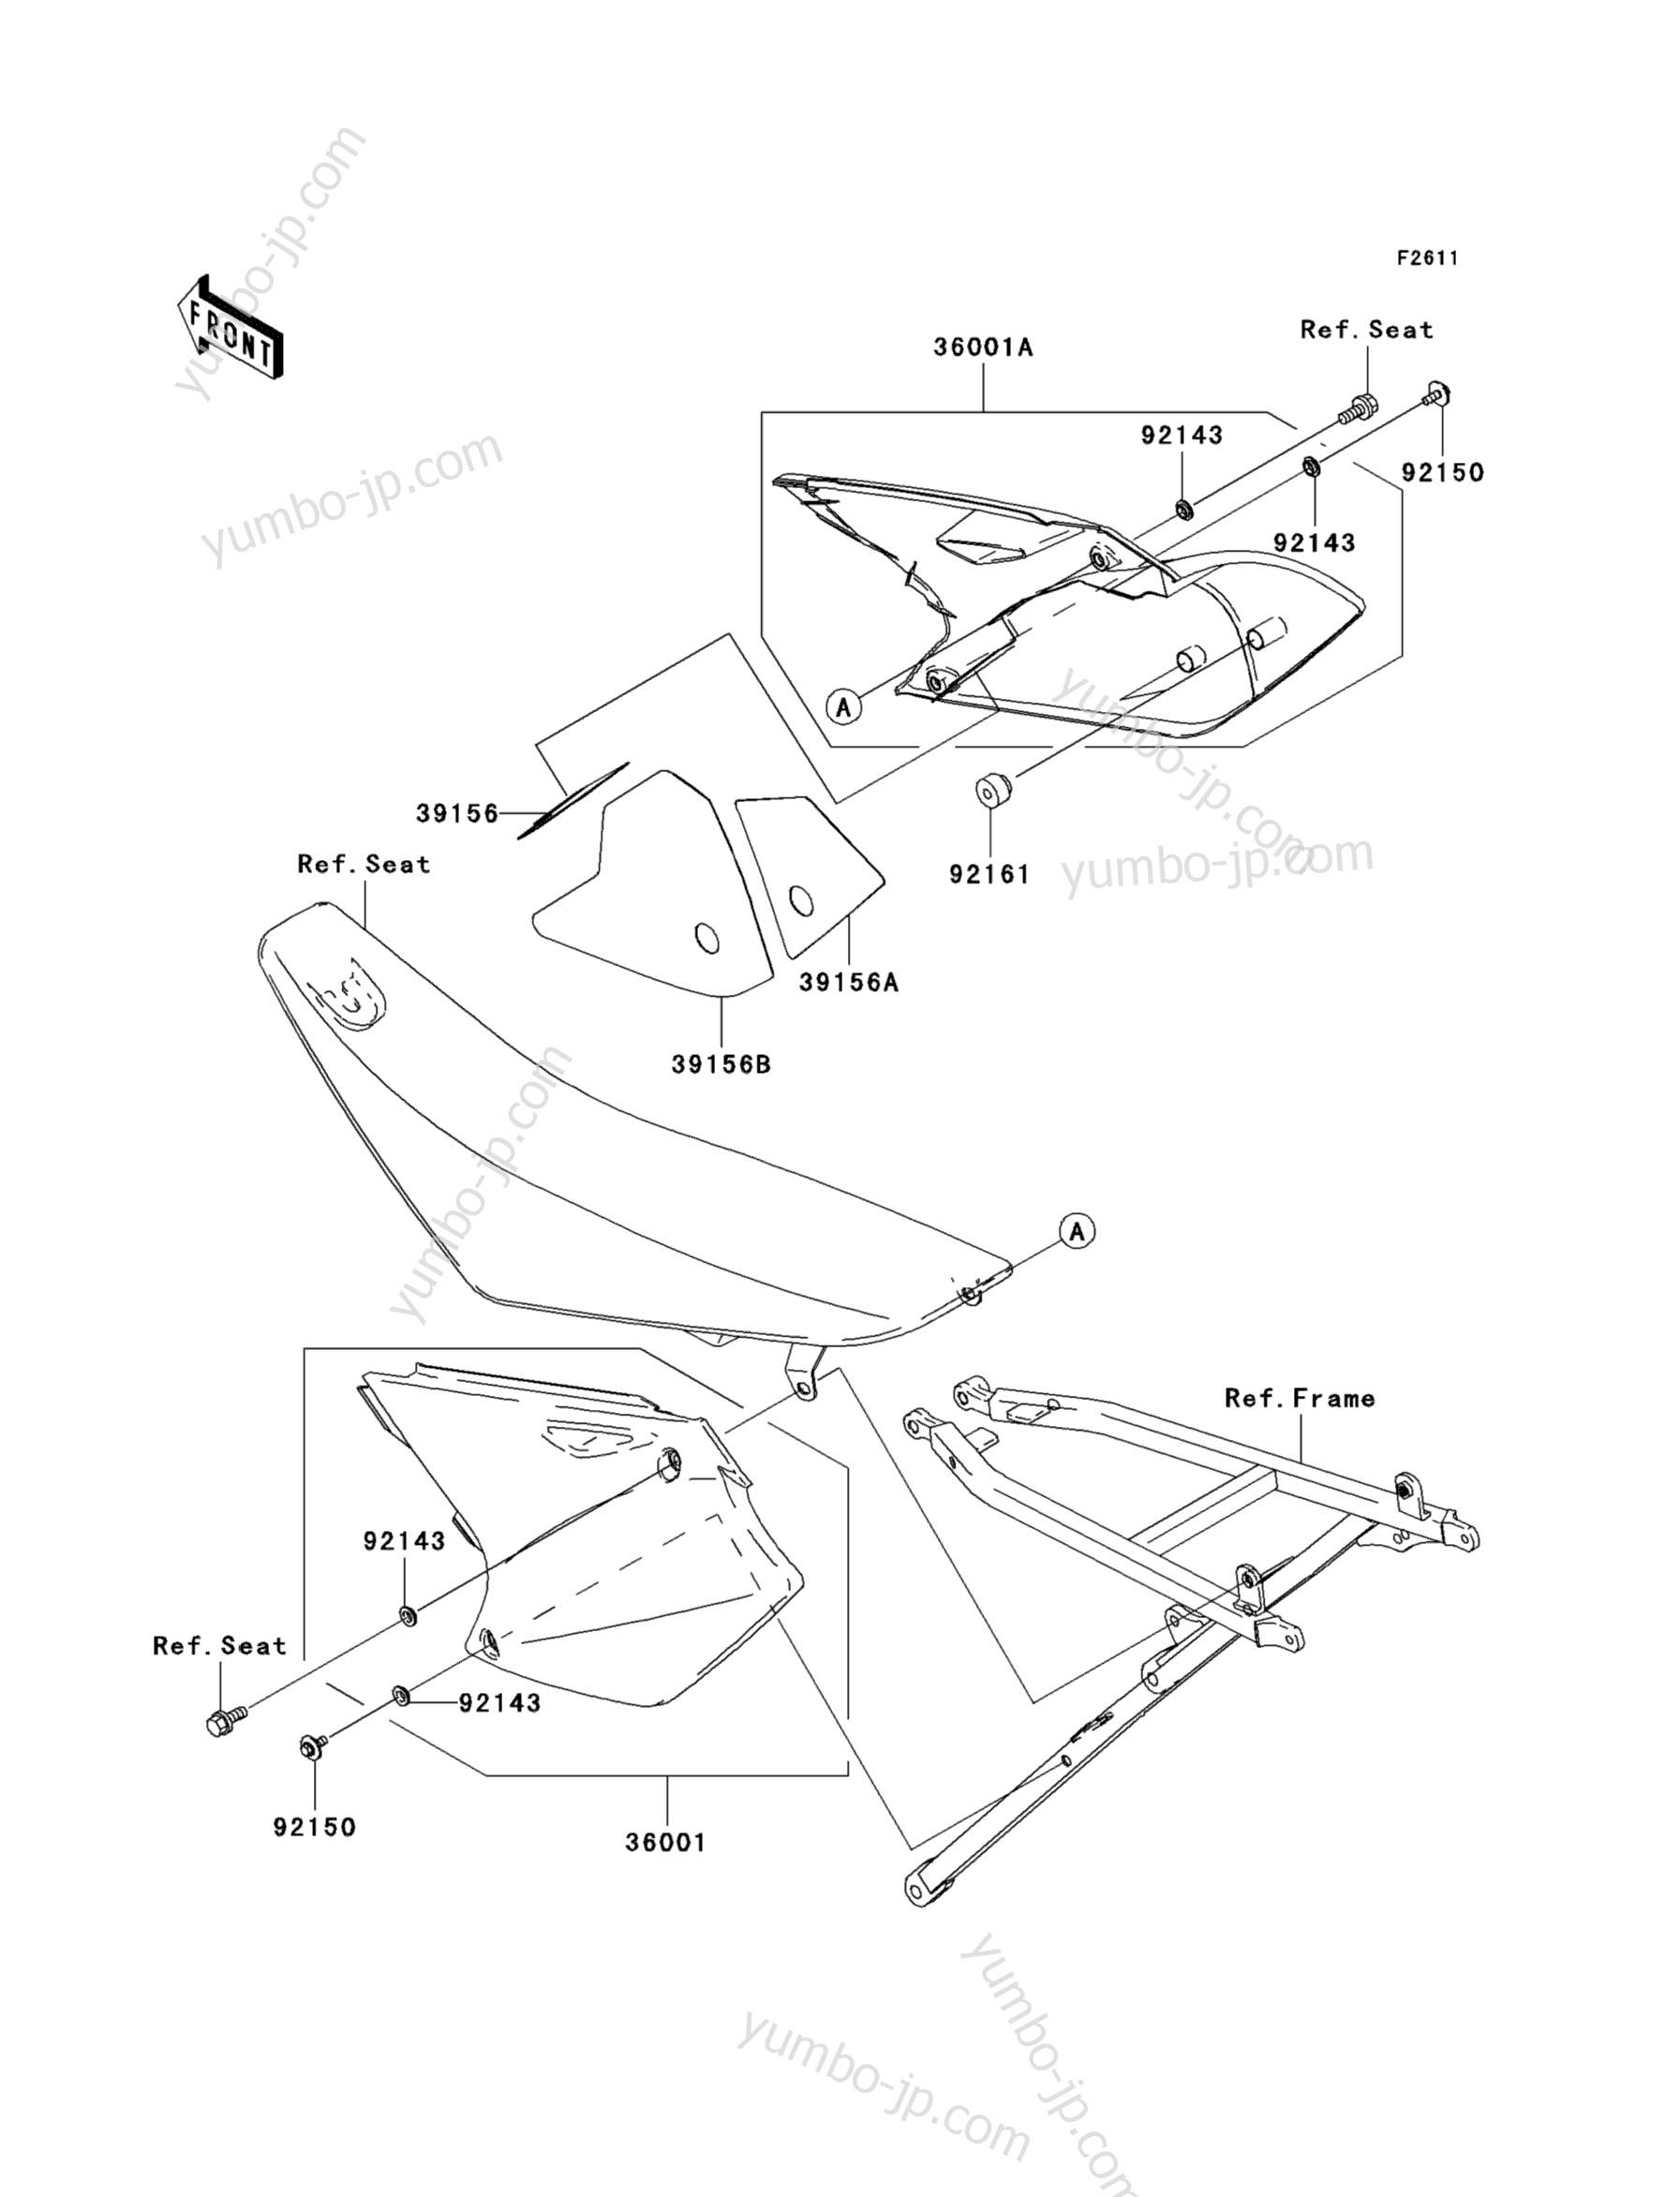 SIDE COVERS for motorcycles KAWASAKI KX250F (KX250-N1) 2004 year